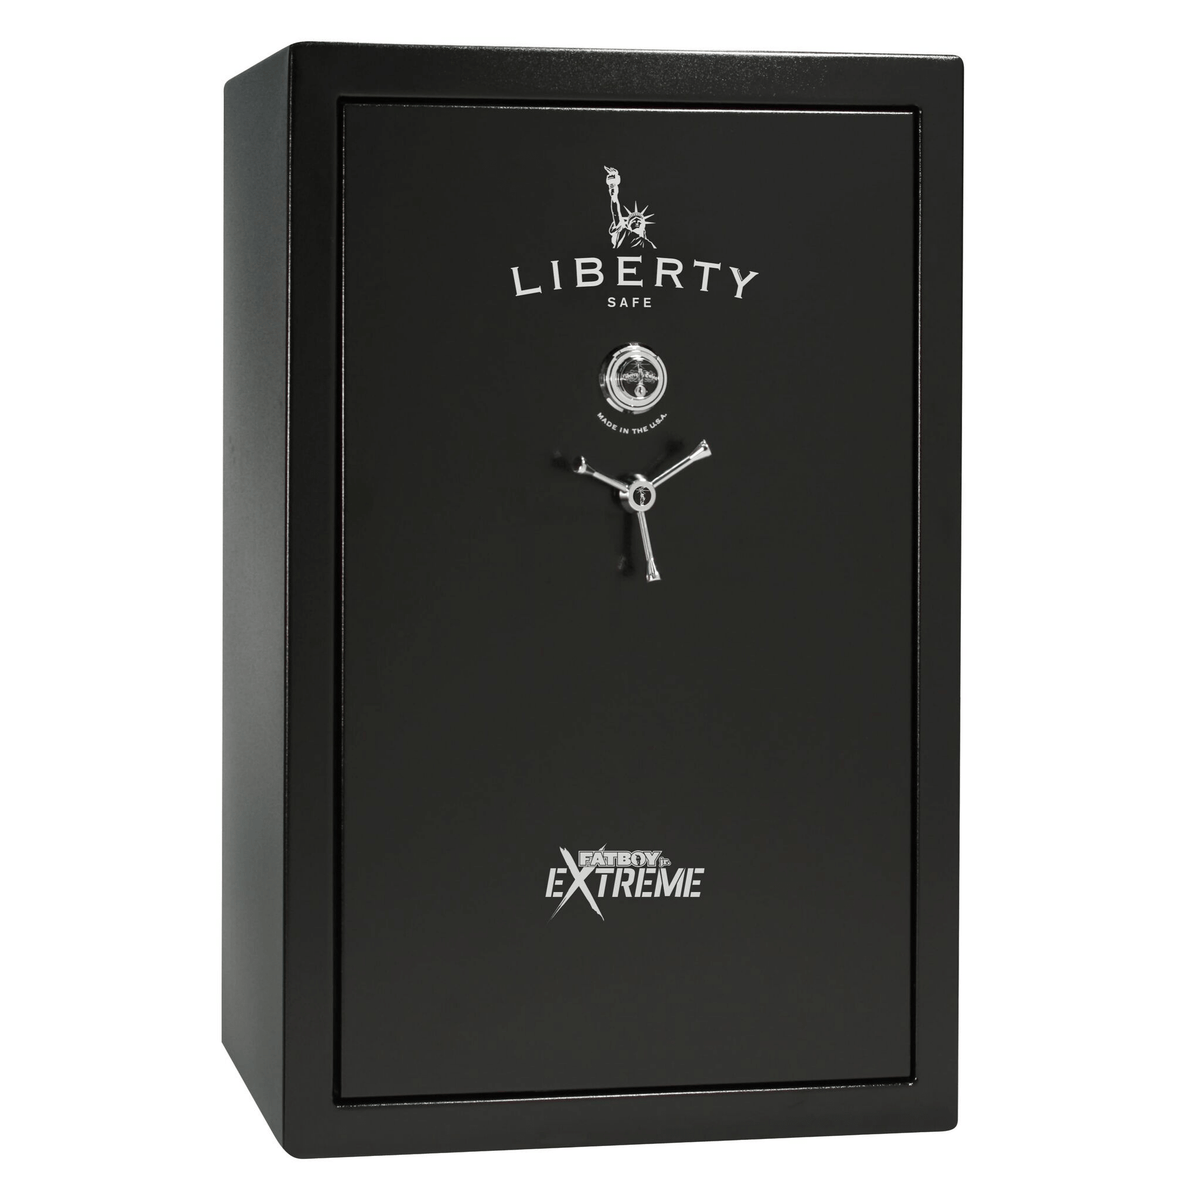 Fatboy Junior Extreme Safe in Textured Black with Chrome Mechanical Lock.